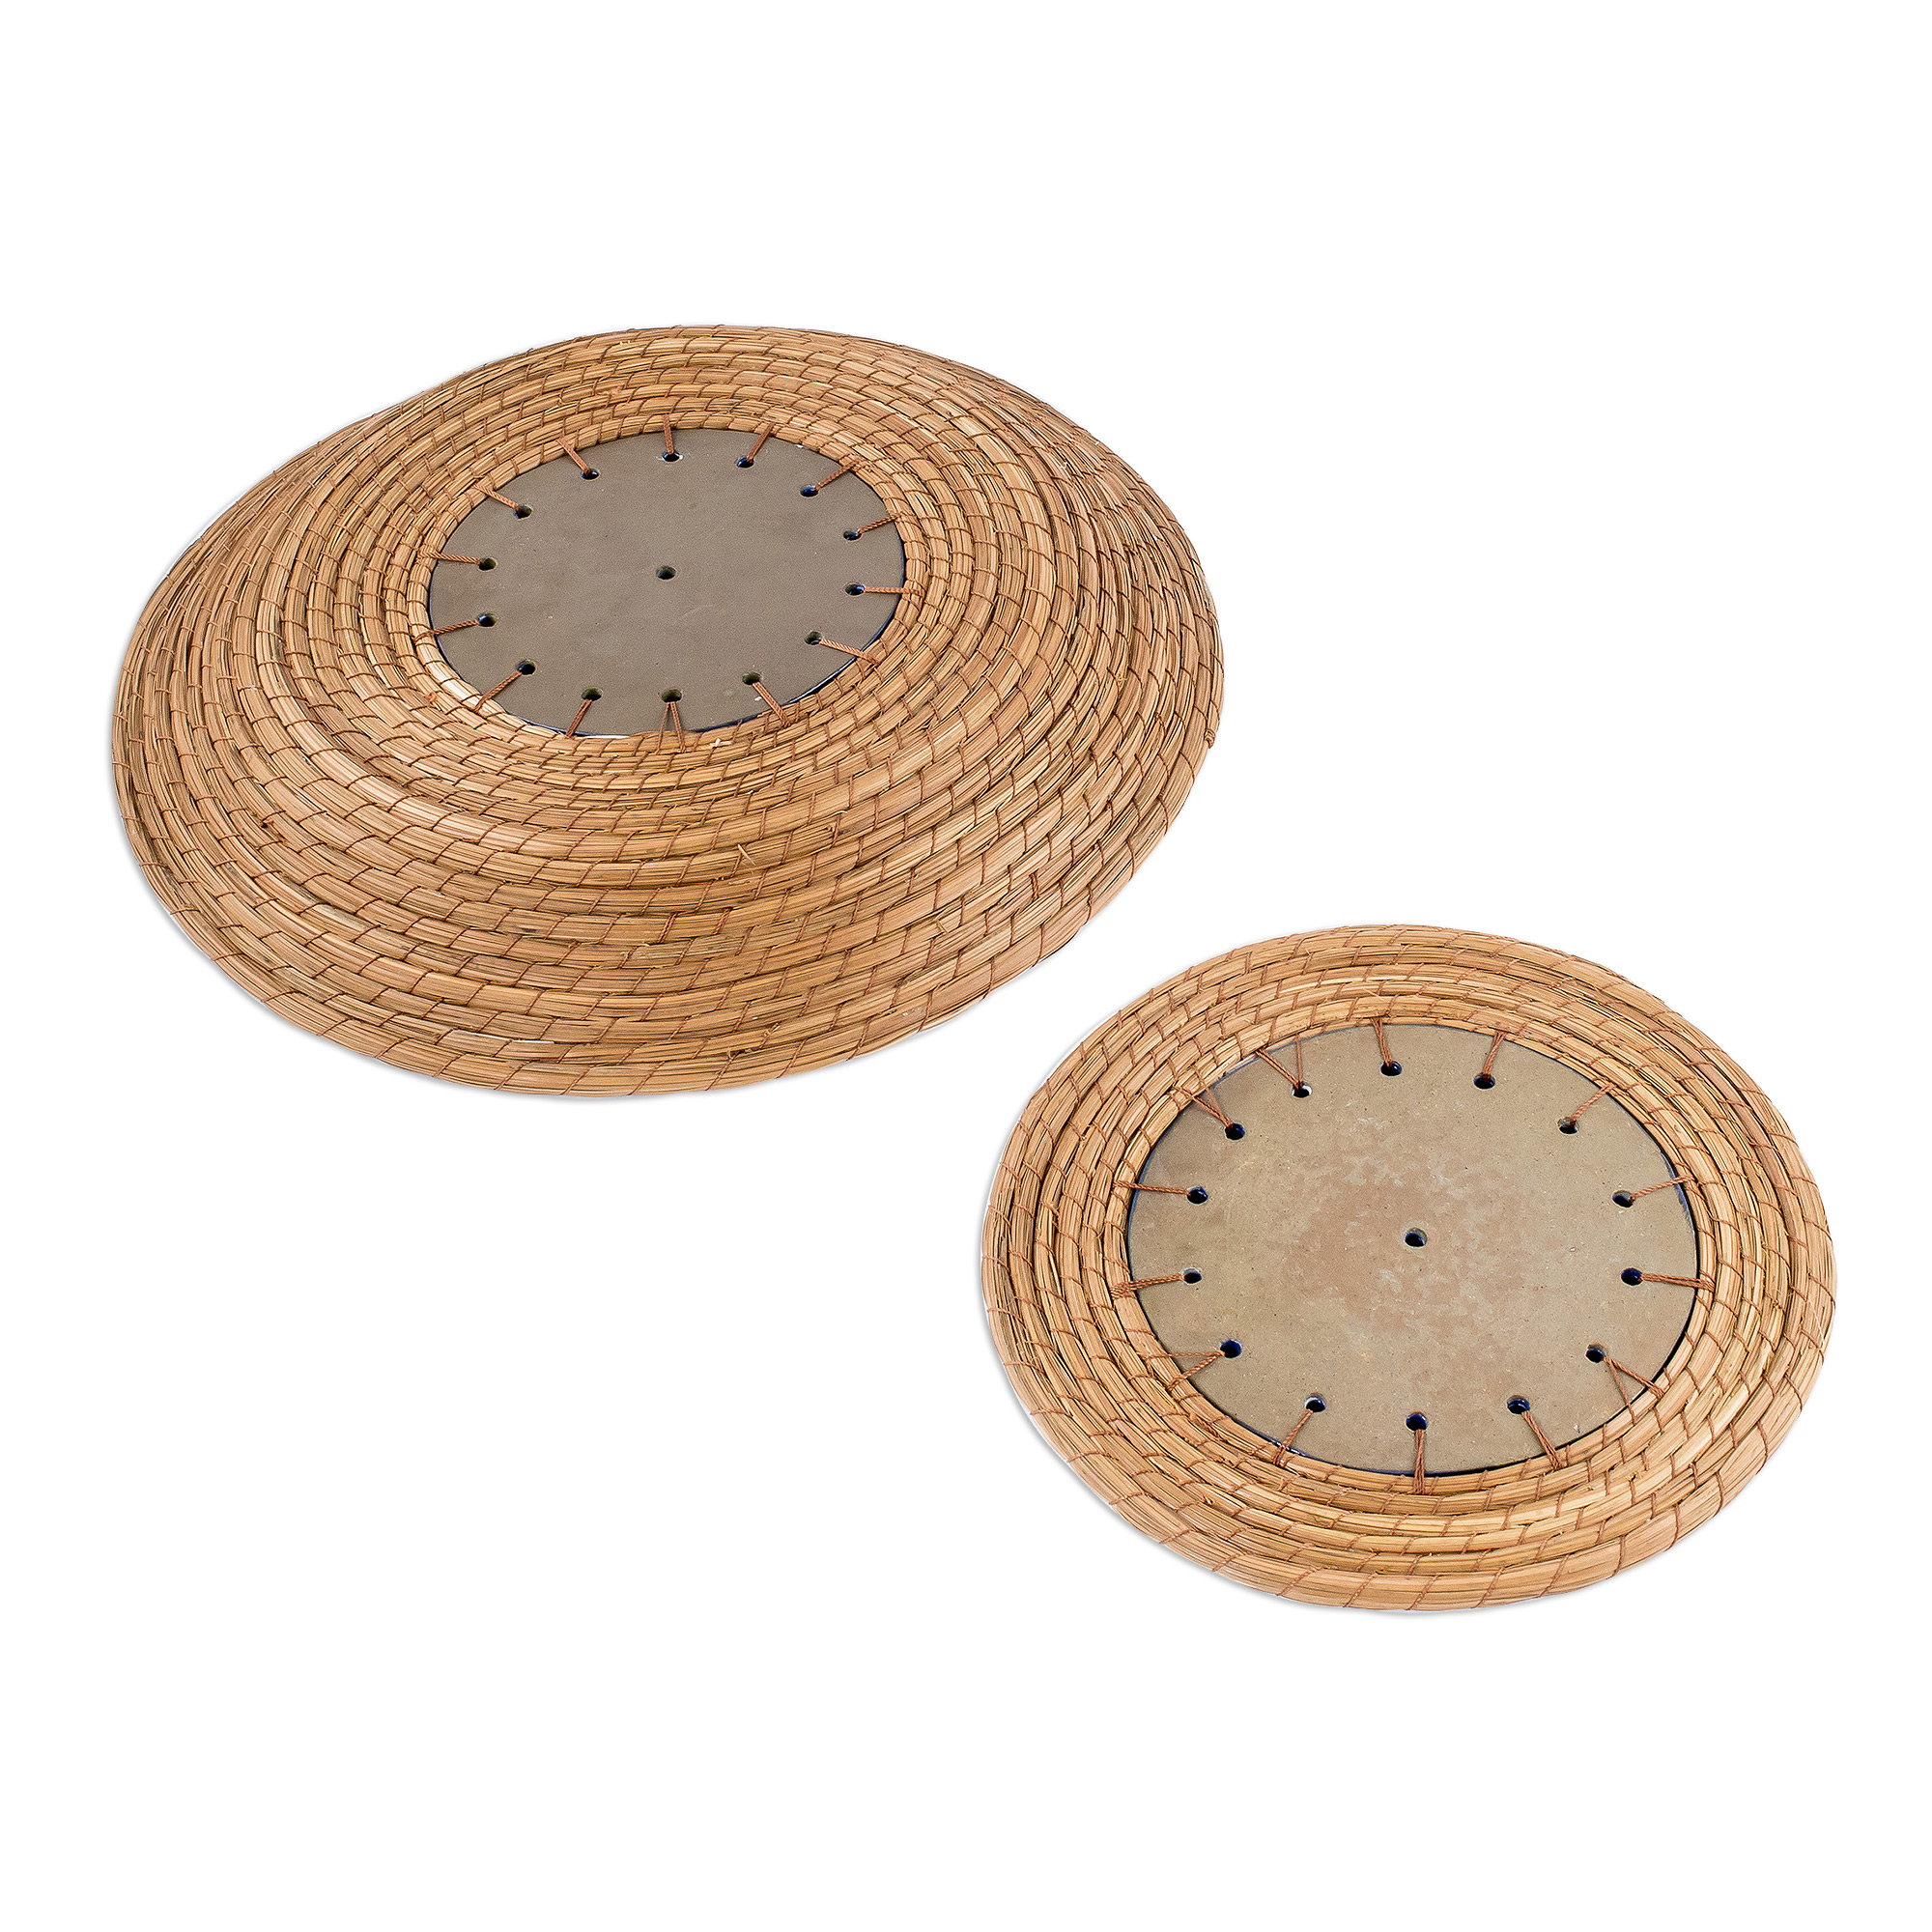 Pine Needle and Ceramic Basket and Trivet (Pair) - Natural Beauty | NOVICA